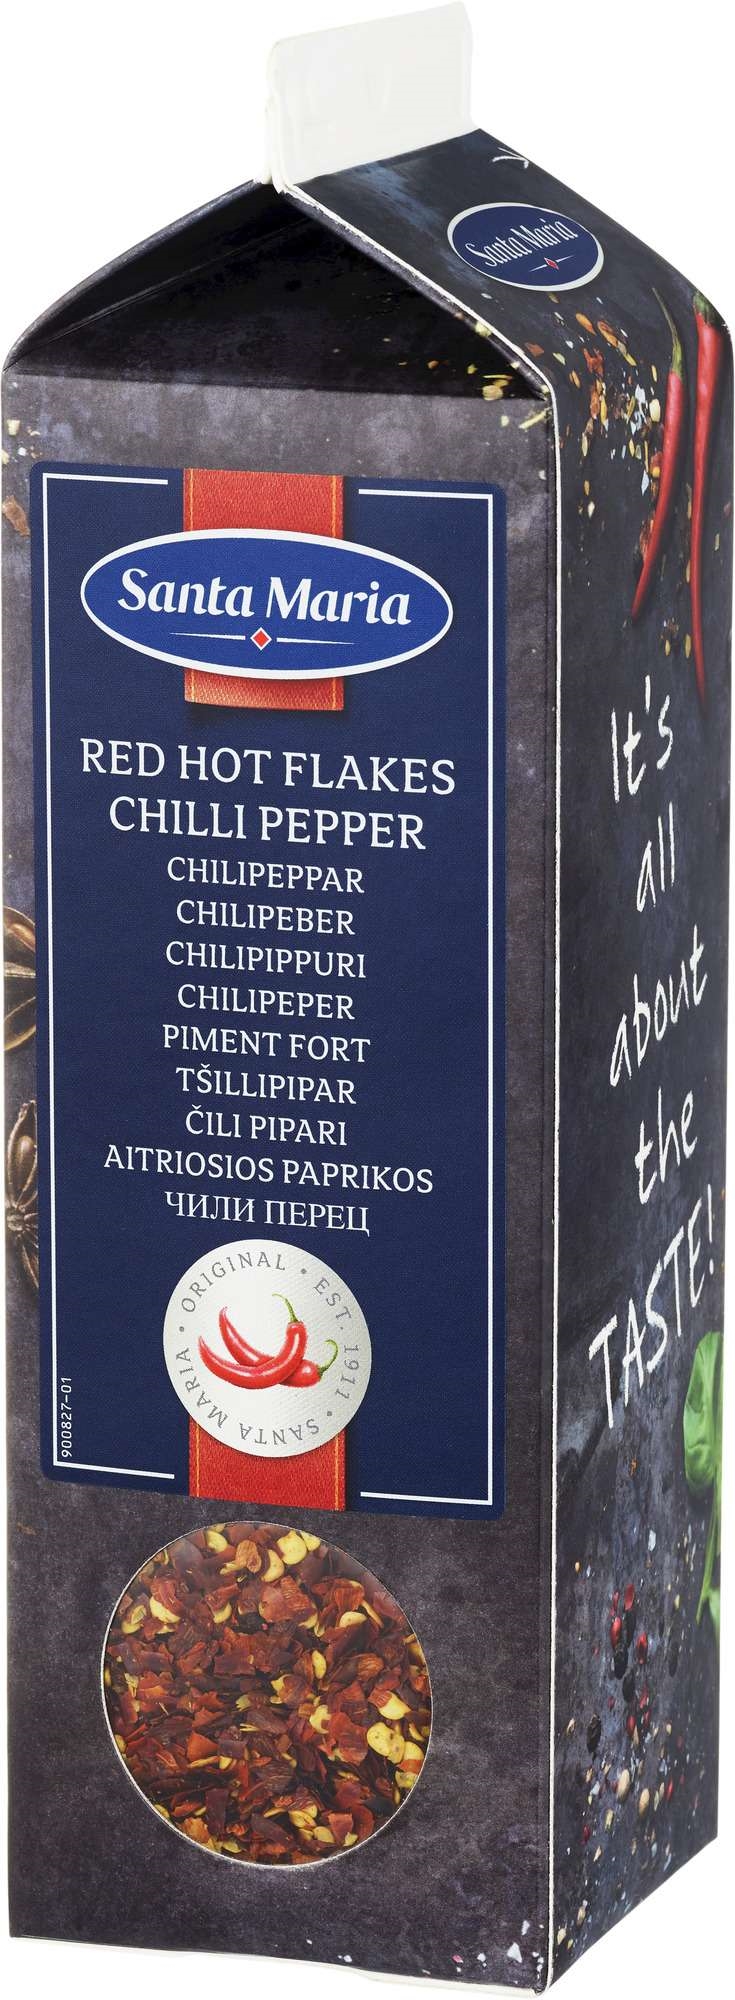 Chilipepper red hot flakes   295g